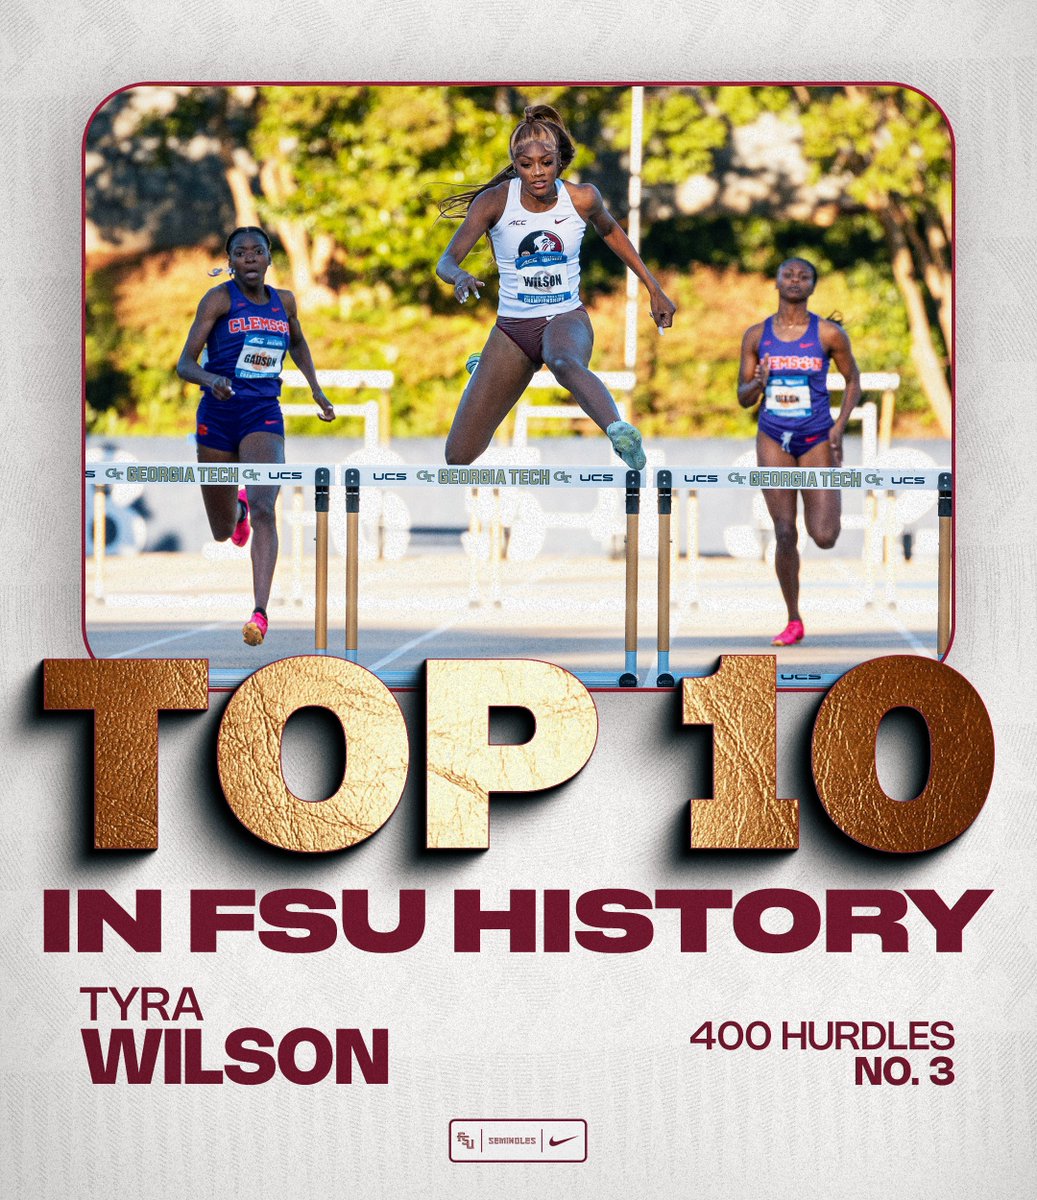 𝐒𝐡𝐞'𝐬 𝐛𝐮𝐢𝐥𝐭 𝐝𝐢𝐟𝐟𝐞𝐫𝐞𝐧𝐭! Tyra Wilson climbs to No.3 all-time in FSU history after boasting a career best in the 400 hurdles (56.30) at the ACC Championship! #OneTribe | #GoNoles